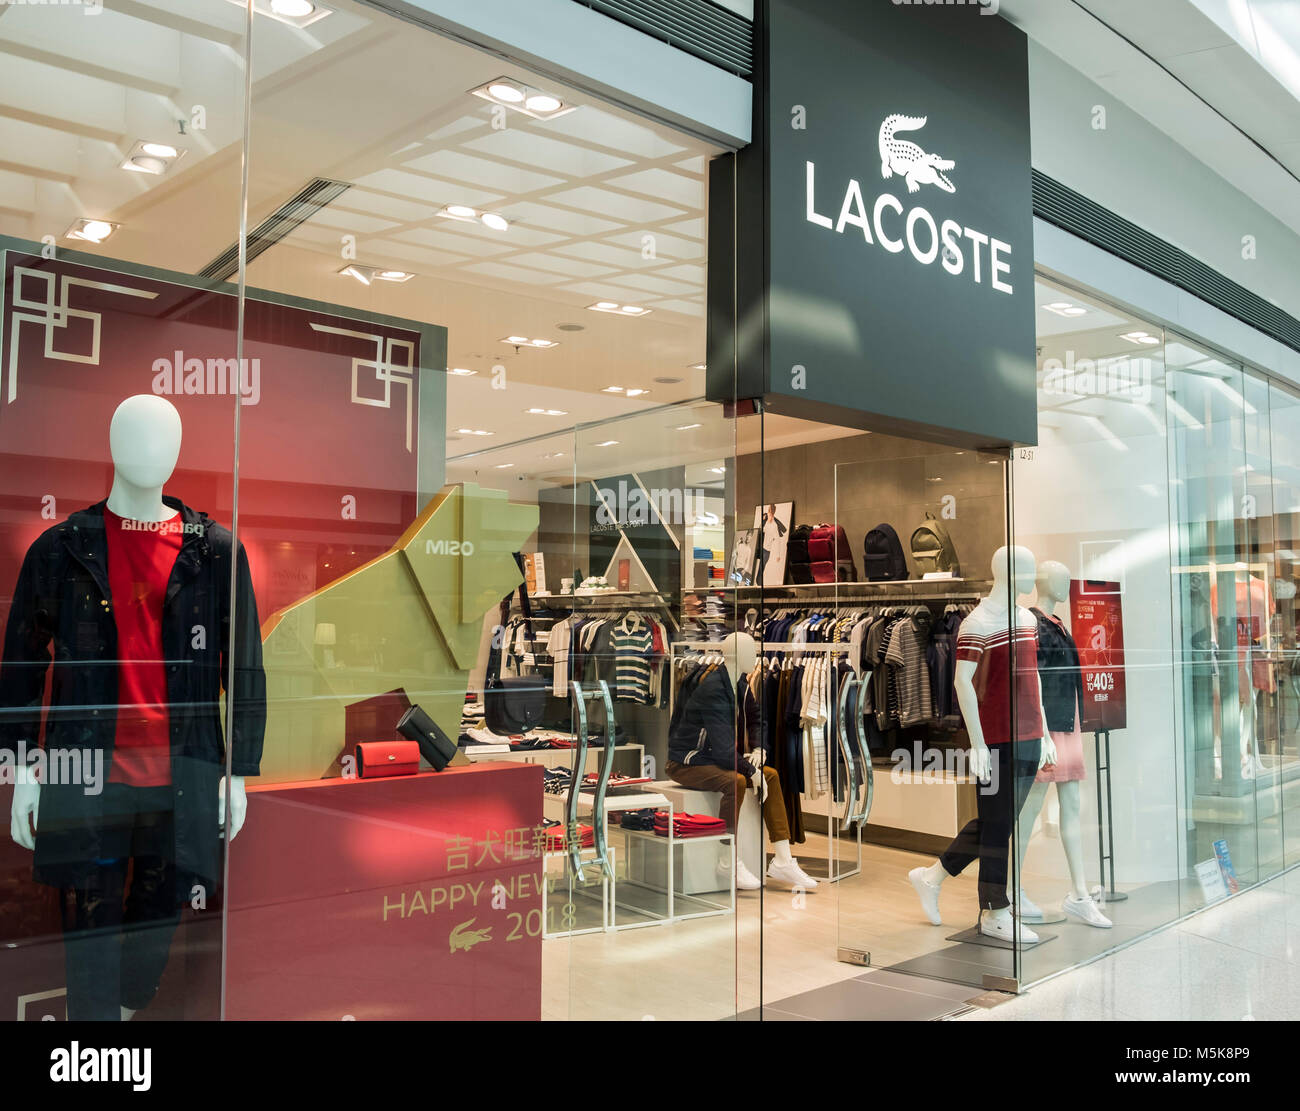 lacoste store in moa